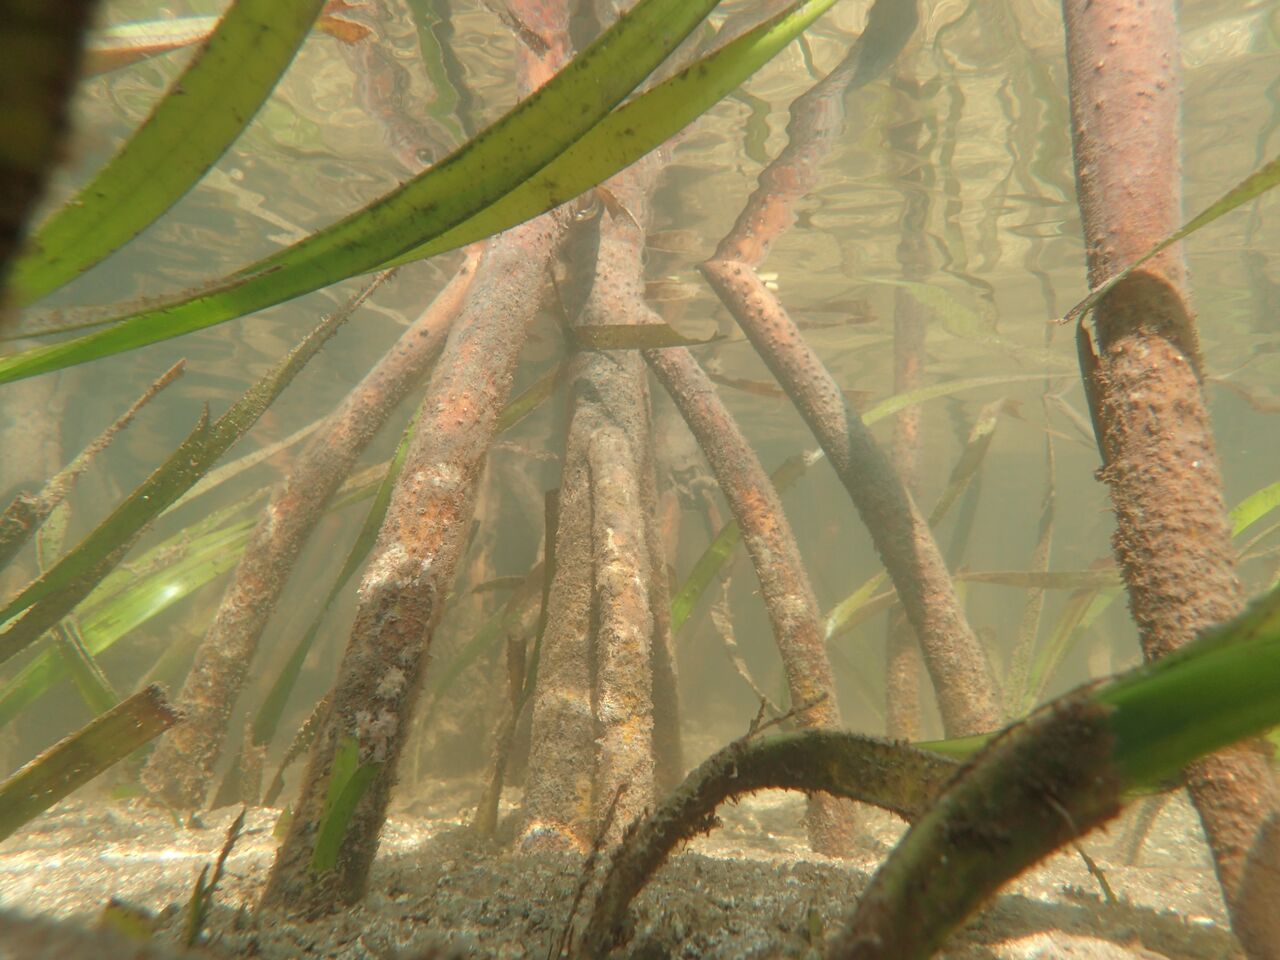 Mangrove roots and seagrass